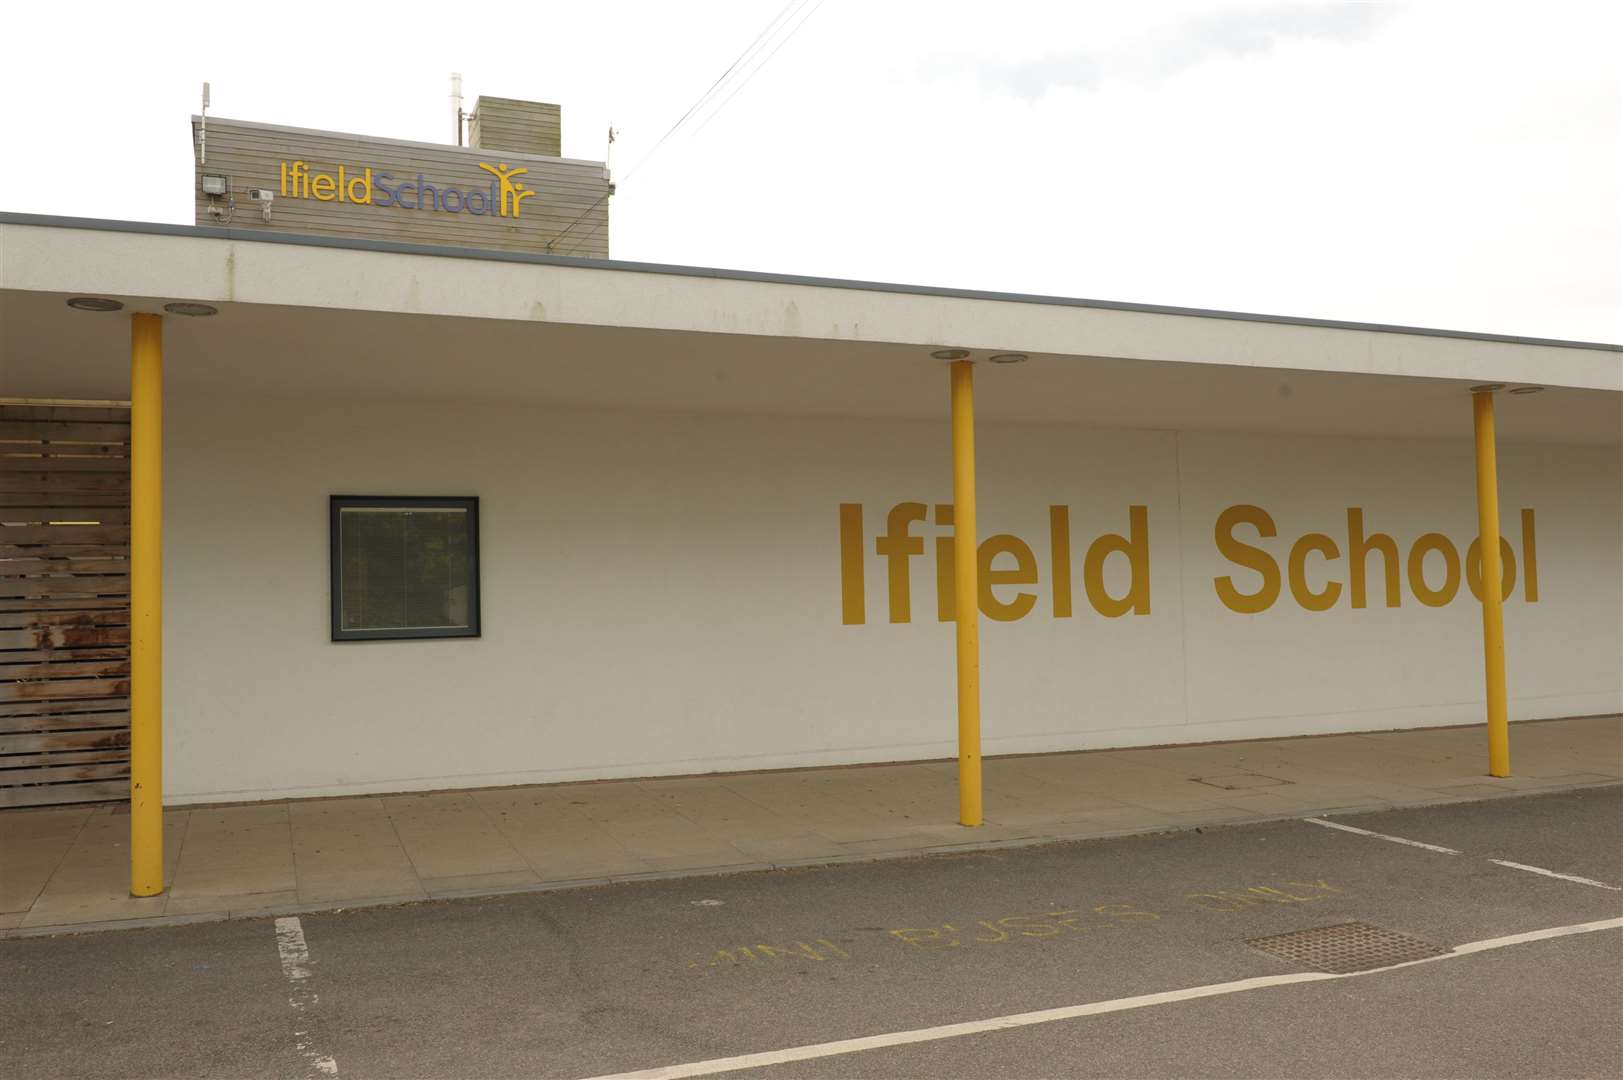 Ifield School caters for nearly 250 pupils but had been open only for a proportion of that number